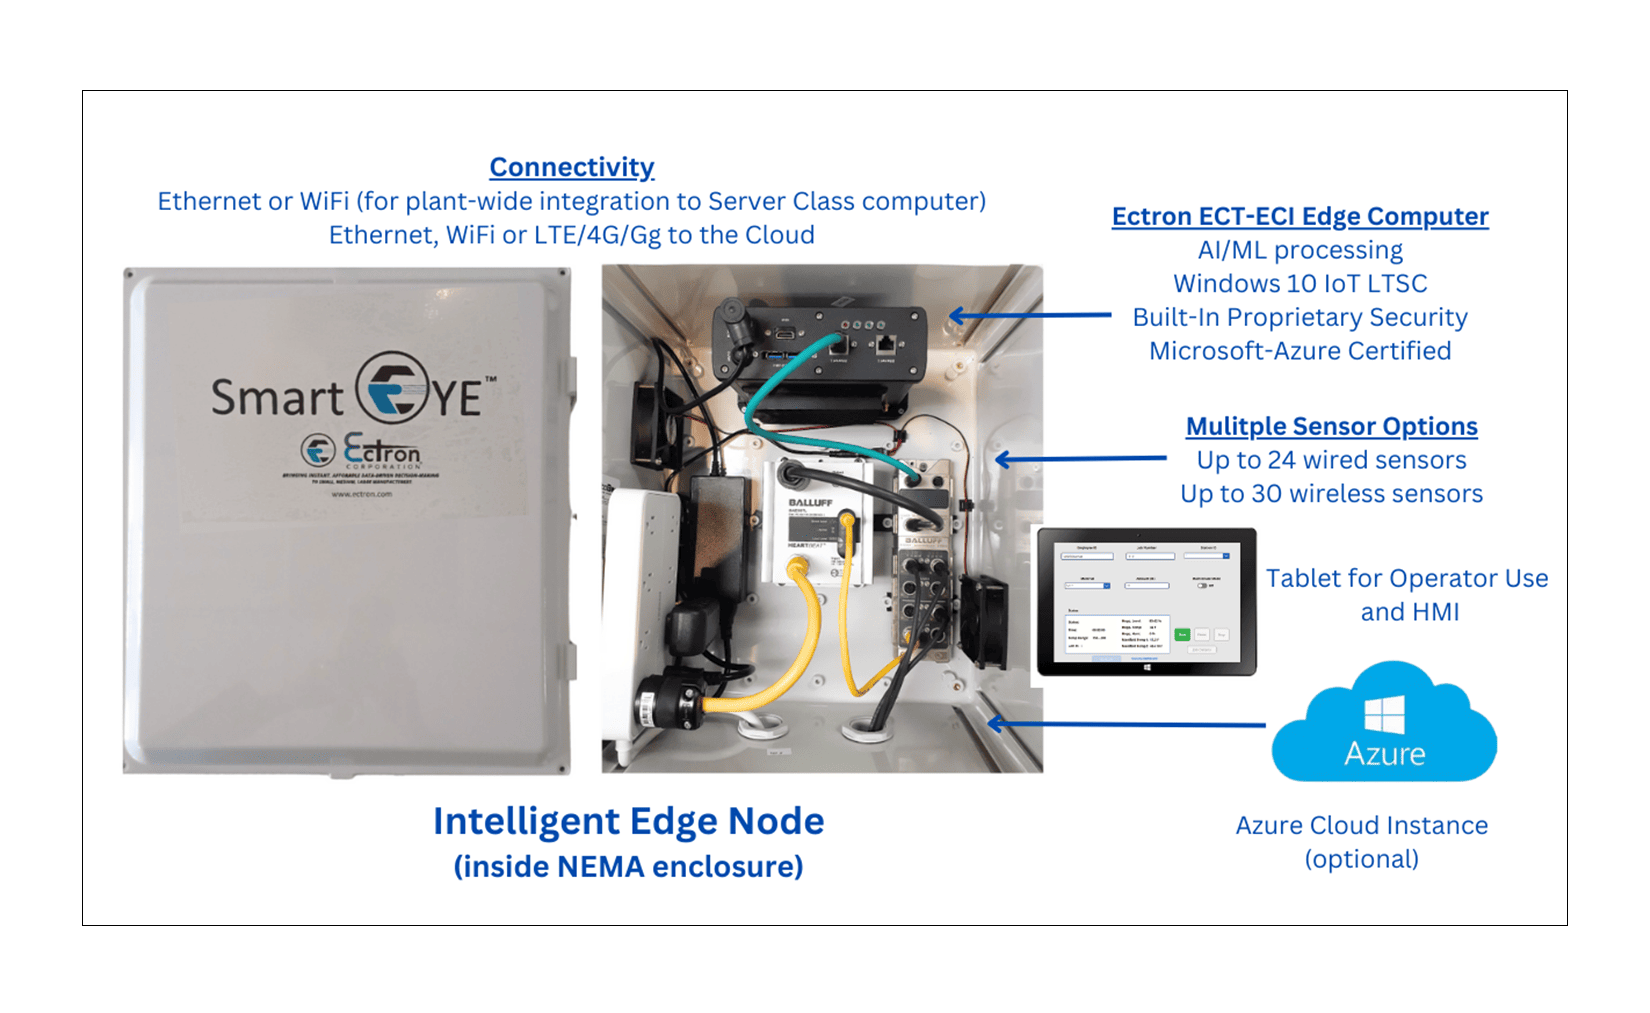 Ectron's Intelligent Edge Node with Artificial Intelligence and Machine Learning for Data Collection and Data Analytics on the Edge (Edge Computing)